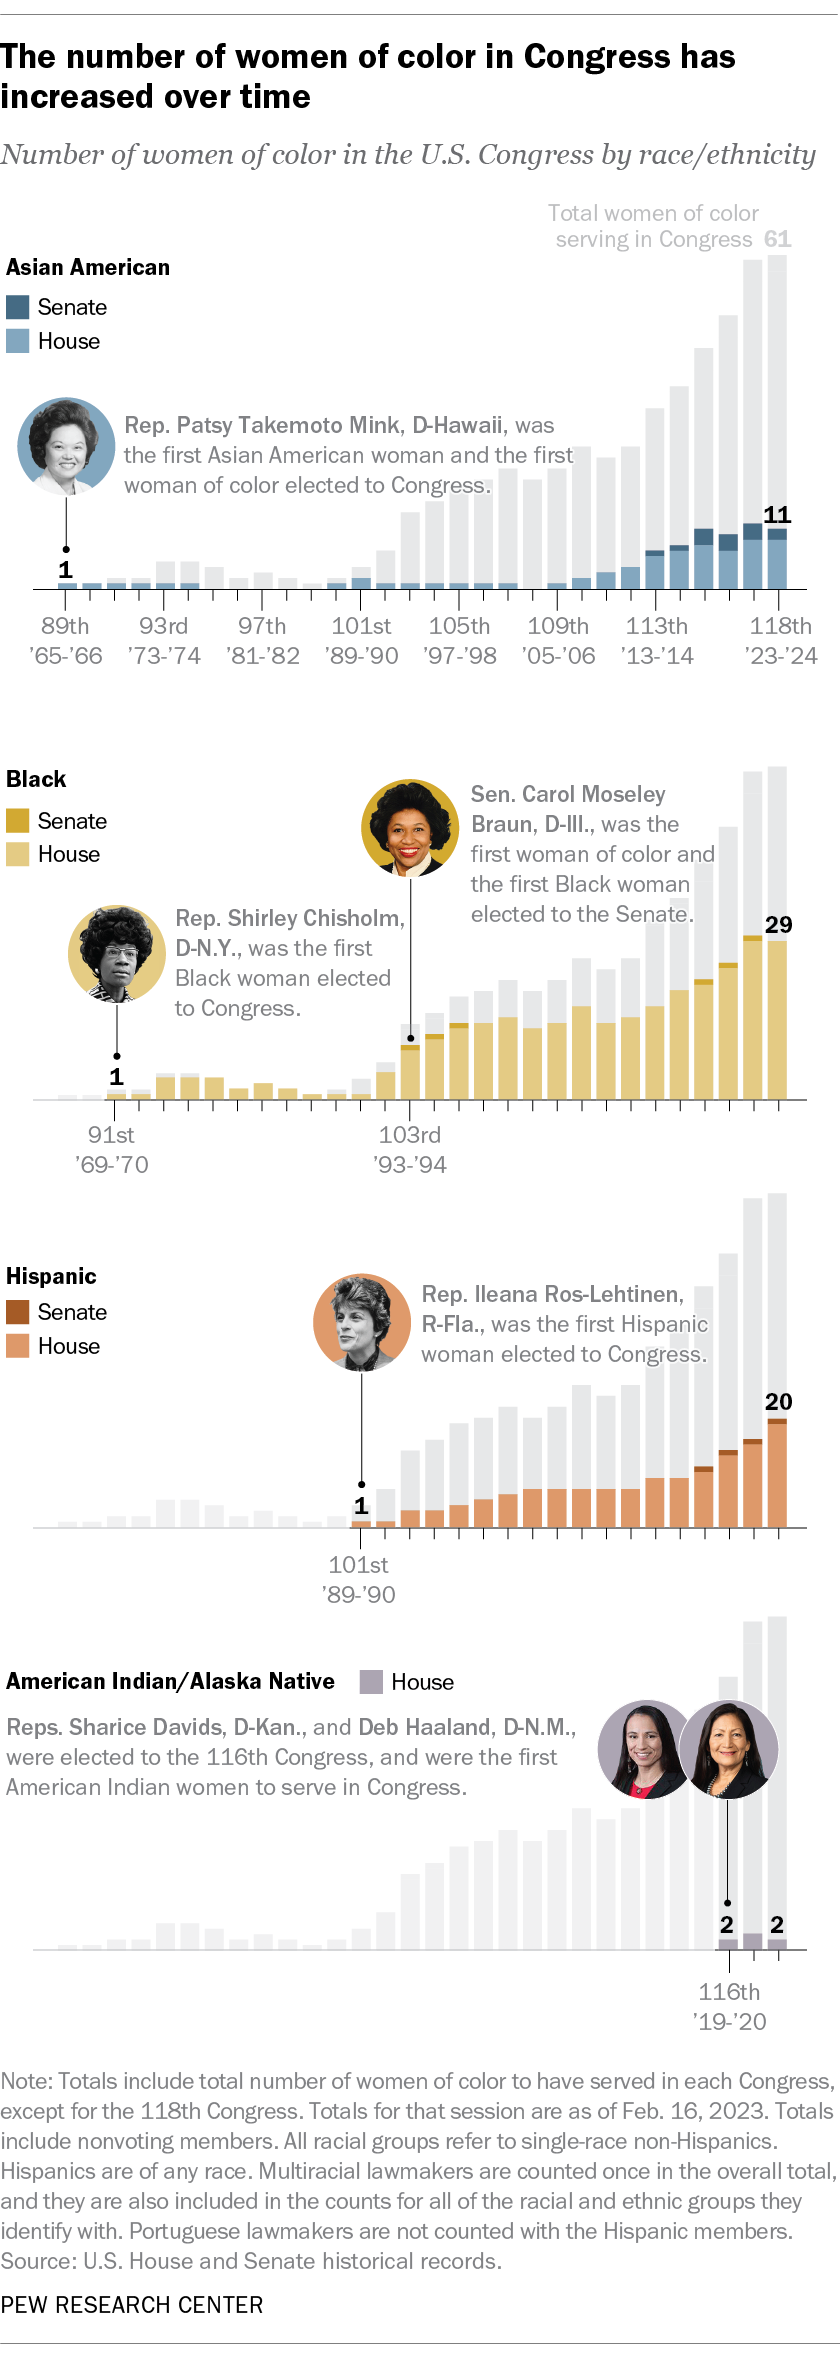 A chart showing that the number of women of color in Congress has increased over time